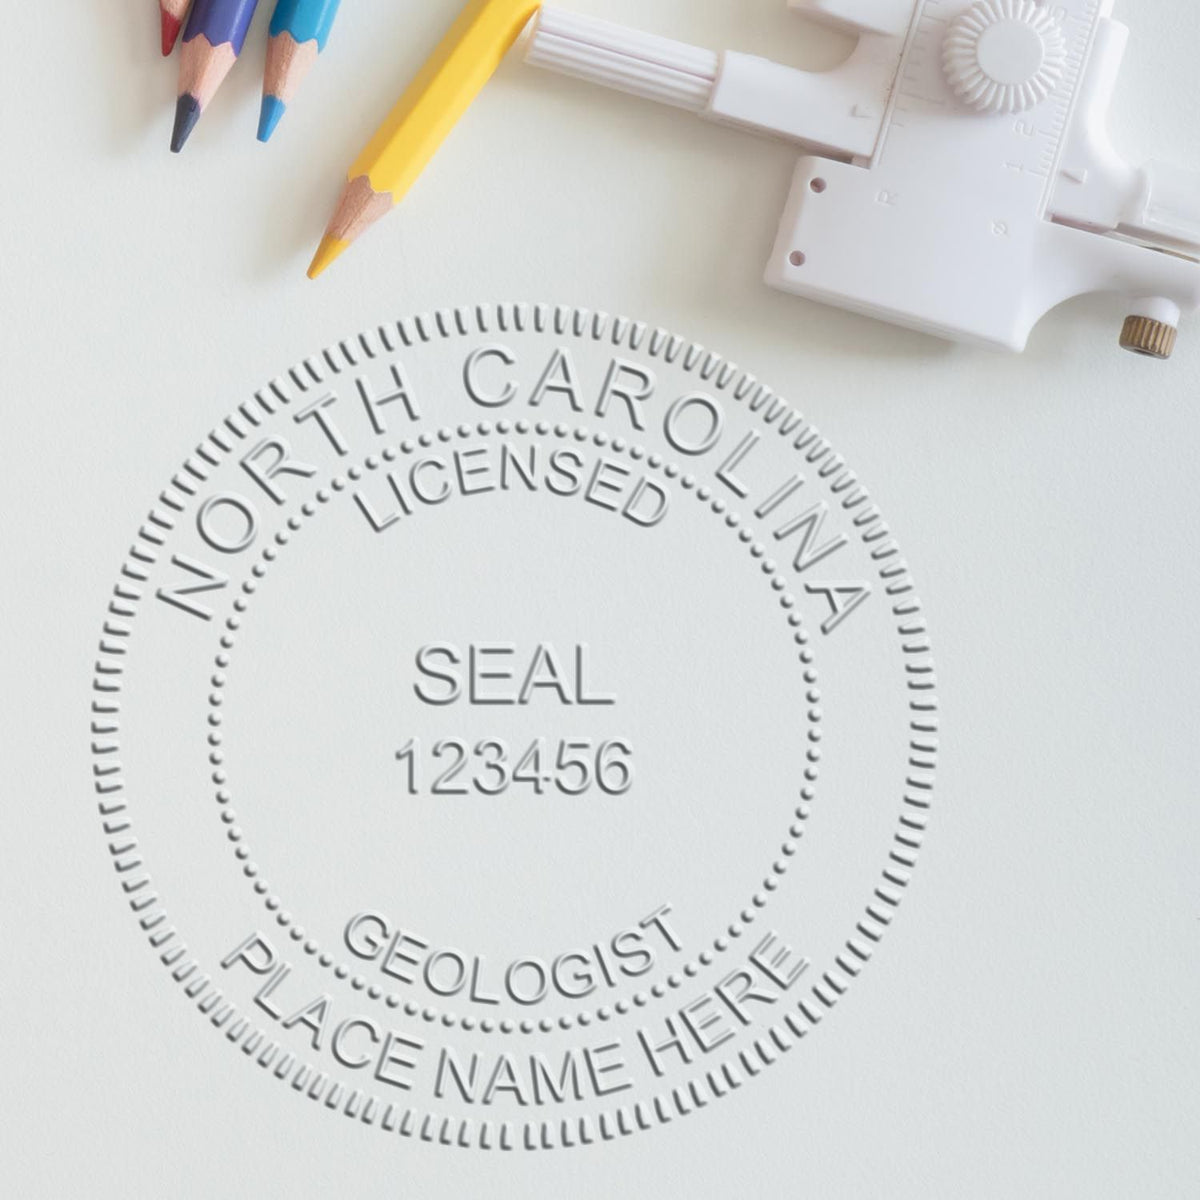 An alternative view of the State of North Carolina Extended Long Reach Geologist Seal stamped on a sheet of paper showing the image in use